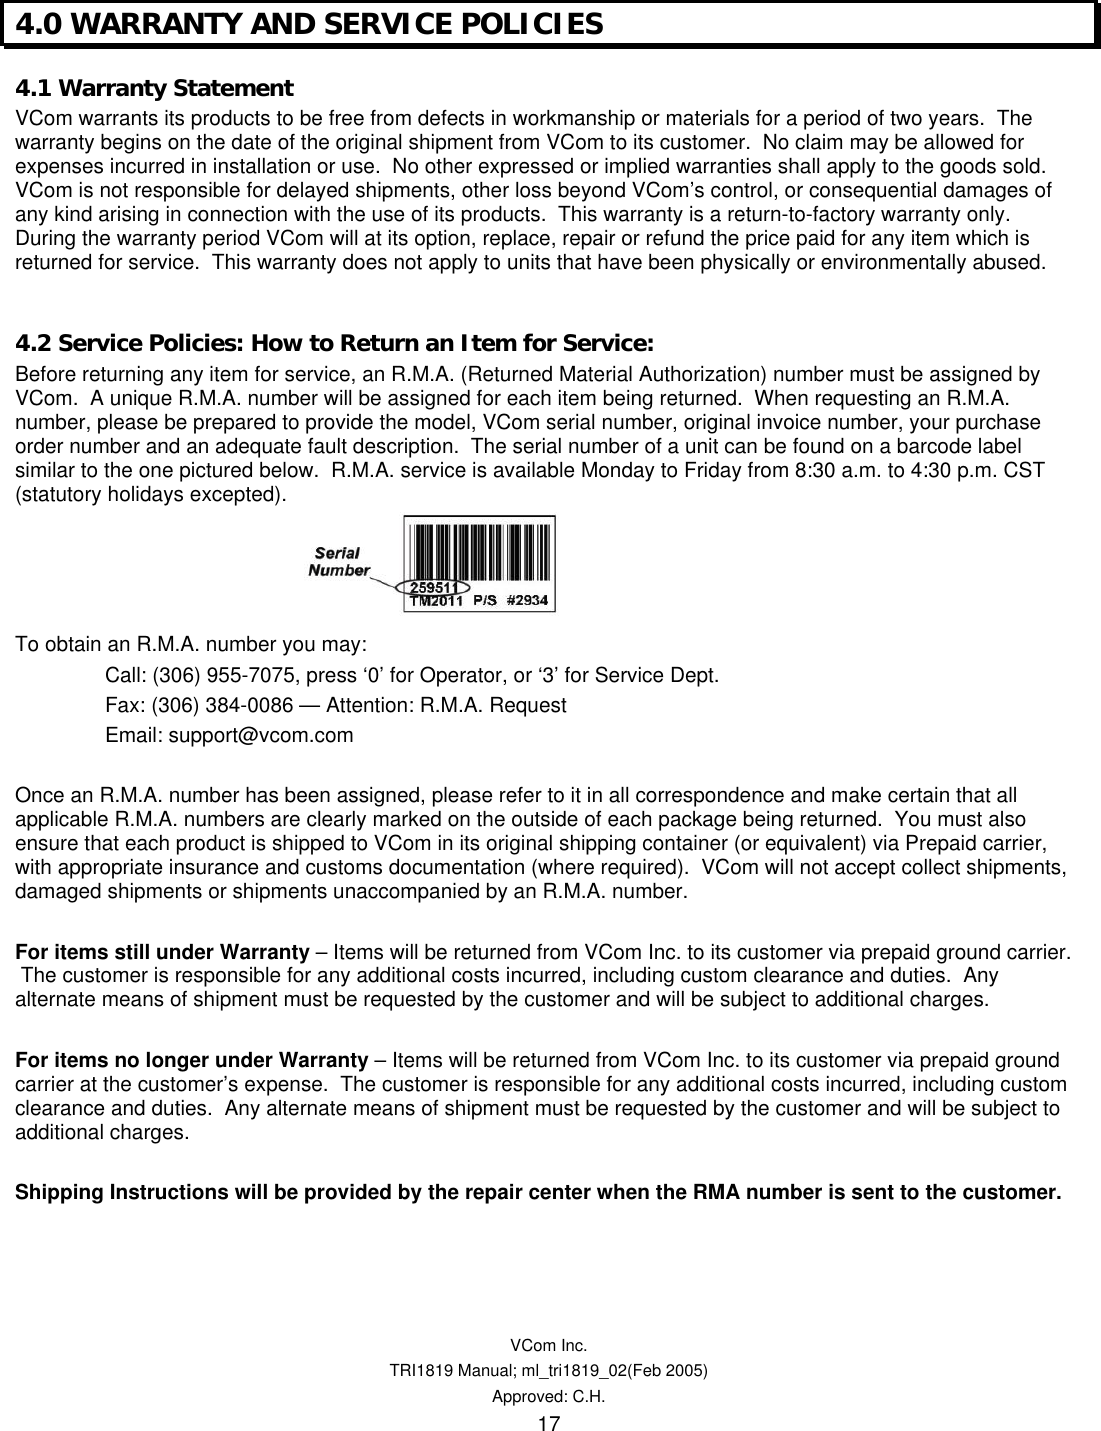   VCom Inc. TRI1819 Manual; ml_tri1819_02(Feb 2005) Approved: C.H.  17 4.0 WARRANTY AND SERVICE POLICIES 4.1 Warranty Statement VCom warrants its products to be free from defects in workmanship or materials for a period of two years.  The warranty begins on the date of the original shipment from VCom to its customer.  No claim may be allowed for expenses incurred in installation or use.  No other expressed or implied warranties shall apply to the goods sold. VCom is not responsible for delayed shipments, other loss beyond VCom’s control, or consequential damages of any kind arising in connection with the use of its products.  This warranty is a return-to-factory warranty only.  During the warranty period VCom will at its option, replace, repair or refund the price paid for any item which is returned for service.  This warranty does not apply to units that have been physically or environmentally abused.  4.2 Service Policies: How to Return an Item for Service: Before returning any item for service, an R.M.A. (Returned Material Authorization) number must be assigned by VCom.  A unique R.M.A. number will be assigned for each item being returned.  When requesting an R.M.A. number, please be prepared to provide the model, VCom serial number, original invoice number, your purchase order number and an adequate fault description.  The serial number of a unit can be found on a barcode label similar to the one pictured below.  R.M.A. service is available Monday to Friday from 8:30 a.m. to 4:30 p.m. CST (statutory holidays excepted).     To obtain an R.M.A. number you may: Call: (306) 955-7075, press ‘0’ for Operator, or ‘3’ for Service Dept. Fax: (306) 384-0086 — Attention: R.M.A. Request Email: support@vcom.com  Once an R.M.A. number has been assigned, please refer to it in all correspondence and make certain that all applicable R.M.A. numbers are clearly marked on the outside of each package being returned.  You must also ensure that each product is shipped to VCom in its original shipping container (or equivalent) via Prepaid carrier, with appropriate insurance and customs documentation (where required).  VCom will not accept collect shipments, damaged shipments or shipments unaccompanied by an R.M.A. number.  For items still under Warranty – Items will be returned from VCom Inc. to its customer via prepaid ground carrier.  The customer is responsible for any additional costs incurred, including custom clearance and duties.  Any alternate means of shipment must be requested by the customer and will be subject to additional charges.   For items no longer under Warranty – Items will be returned from VCom Inc. to its customer via prepaid ground carrier at the customer’s expense.  The customer is responsible for any additional costs incurred, including custom clearance and duties.  Any alternate means of shipment must be requested by the customer and will be subject to additional charges.  Shipping Instructions will be provided by the repair center when the RMA number is sent to the customer.  